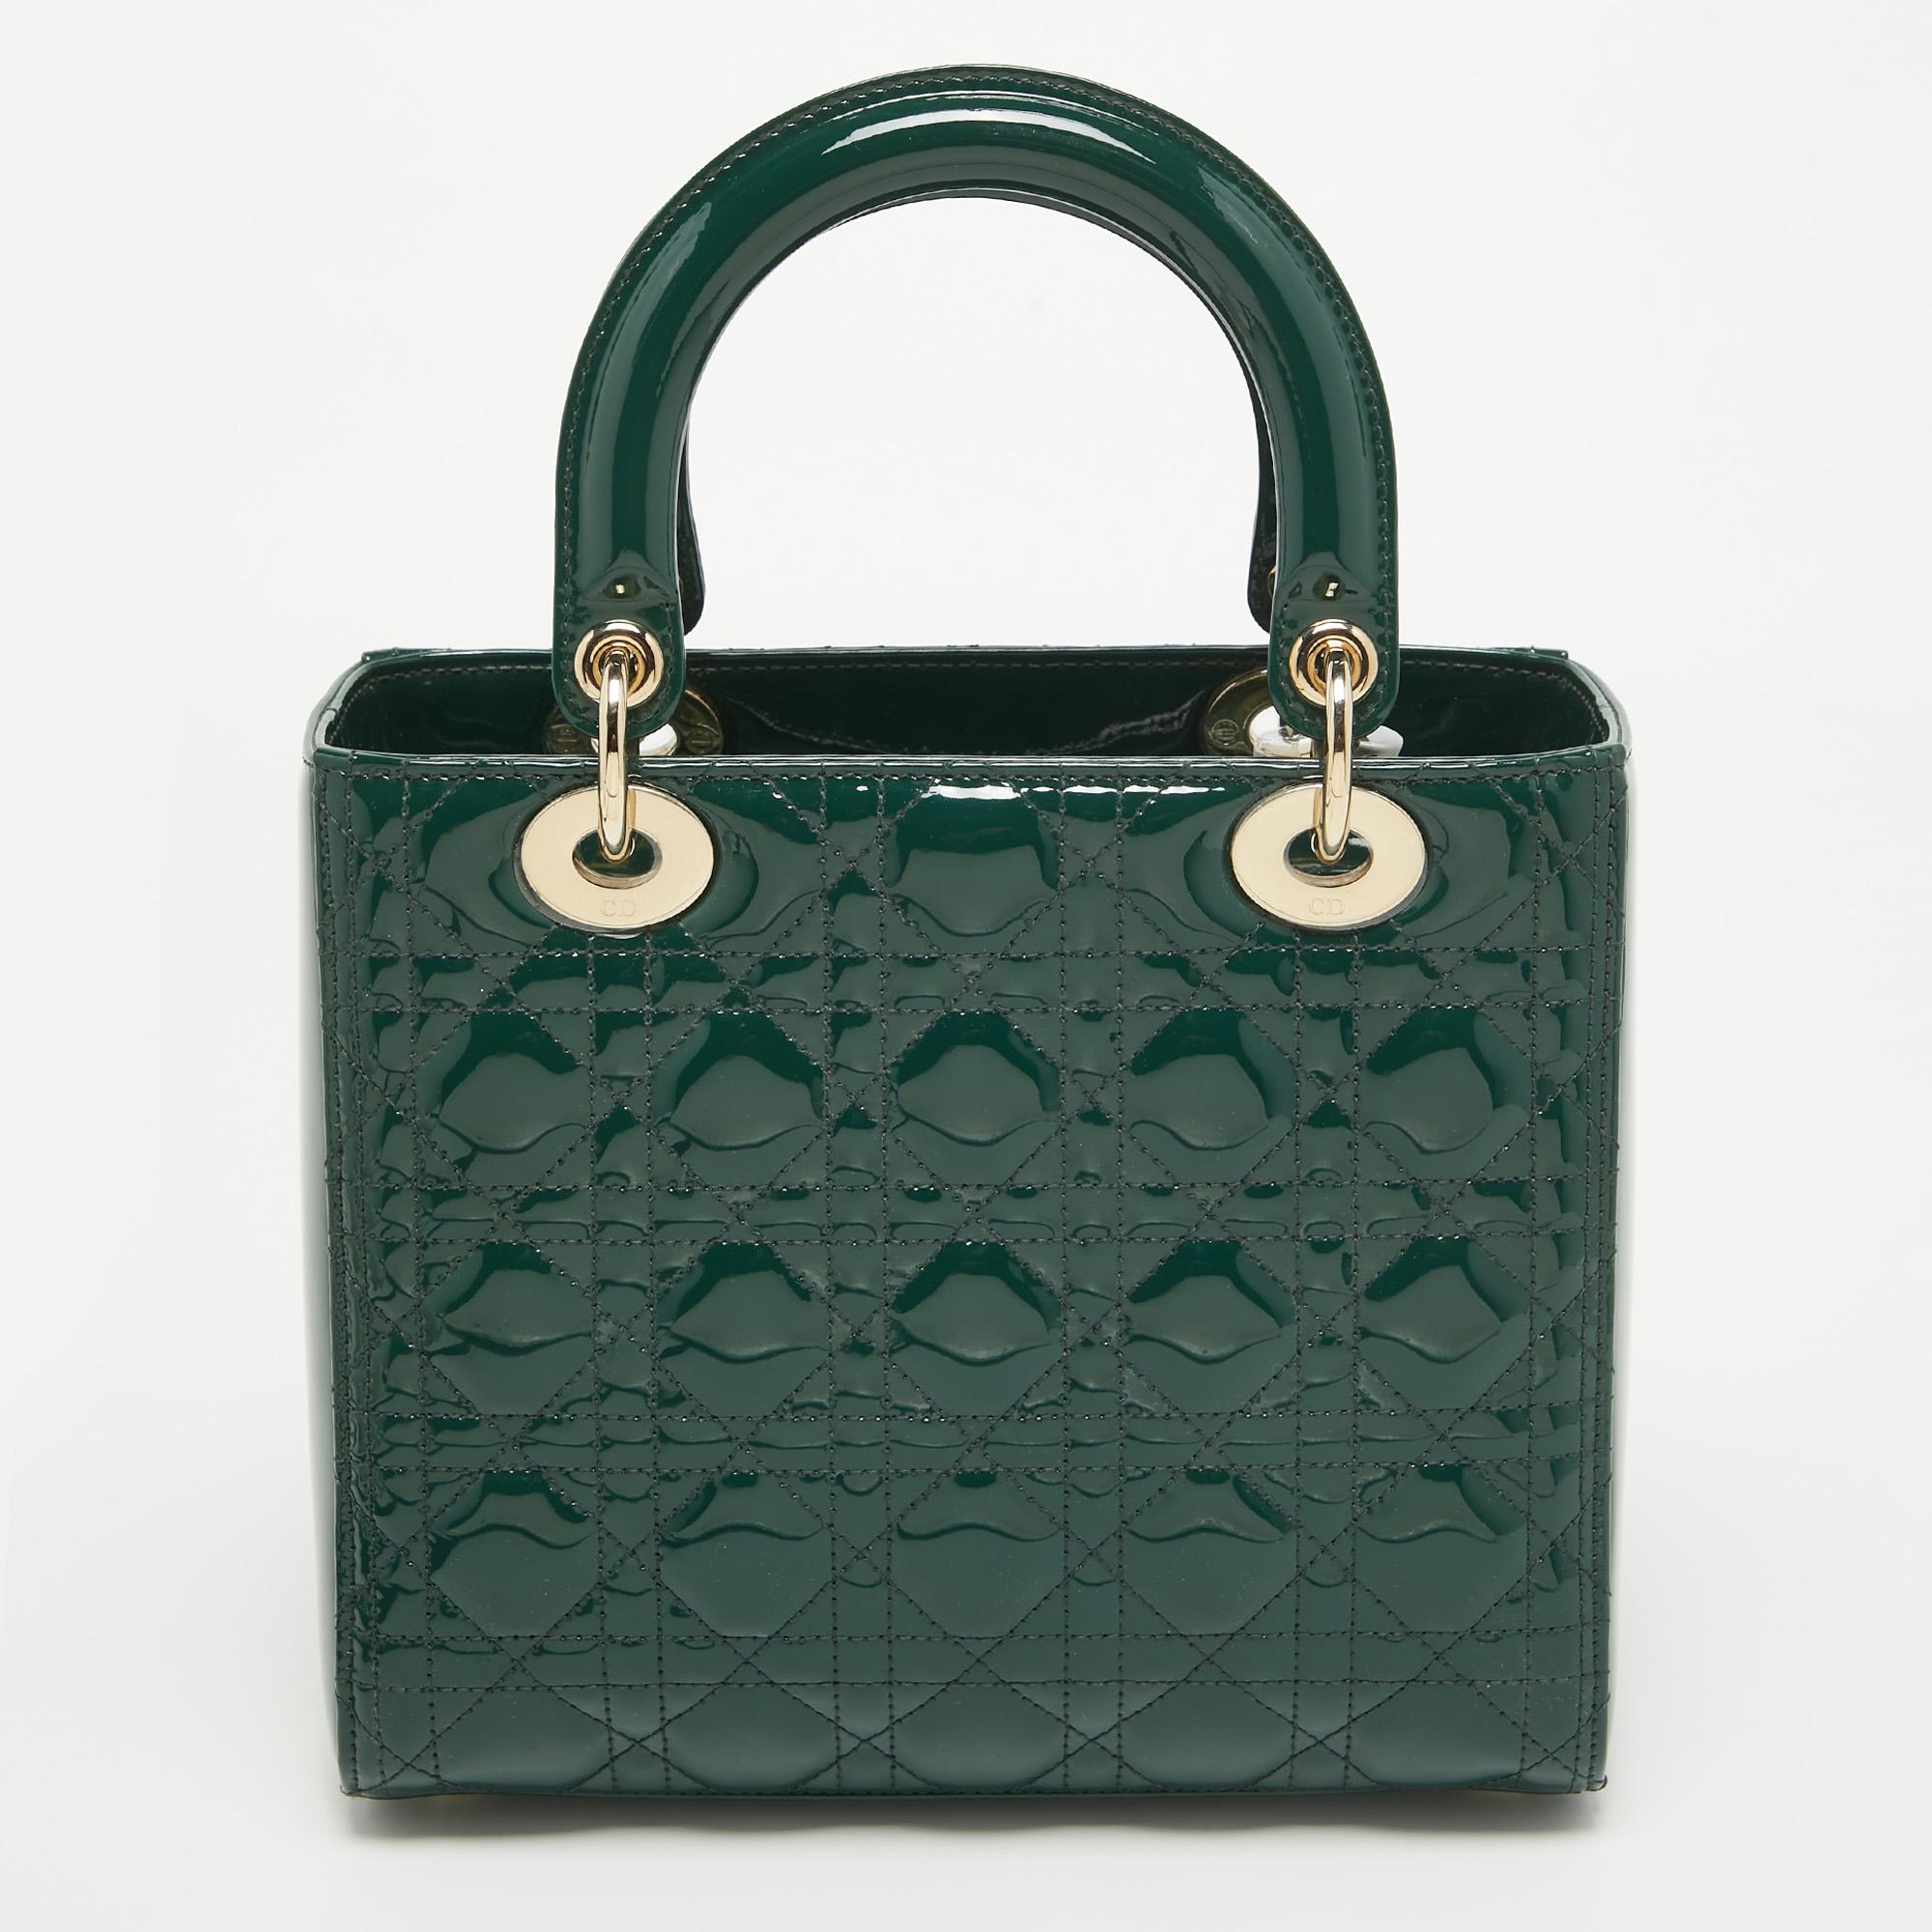 The Lady Dior tote is a Dior creation that has gained wide recognition and is a coveted bag that every fashionista craves to possess. The green tote has been crafted from patent leather and carries the signature Cannage quilt. It is equipped with a